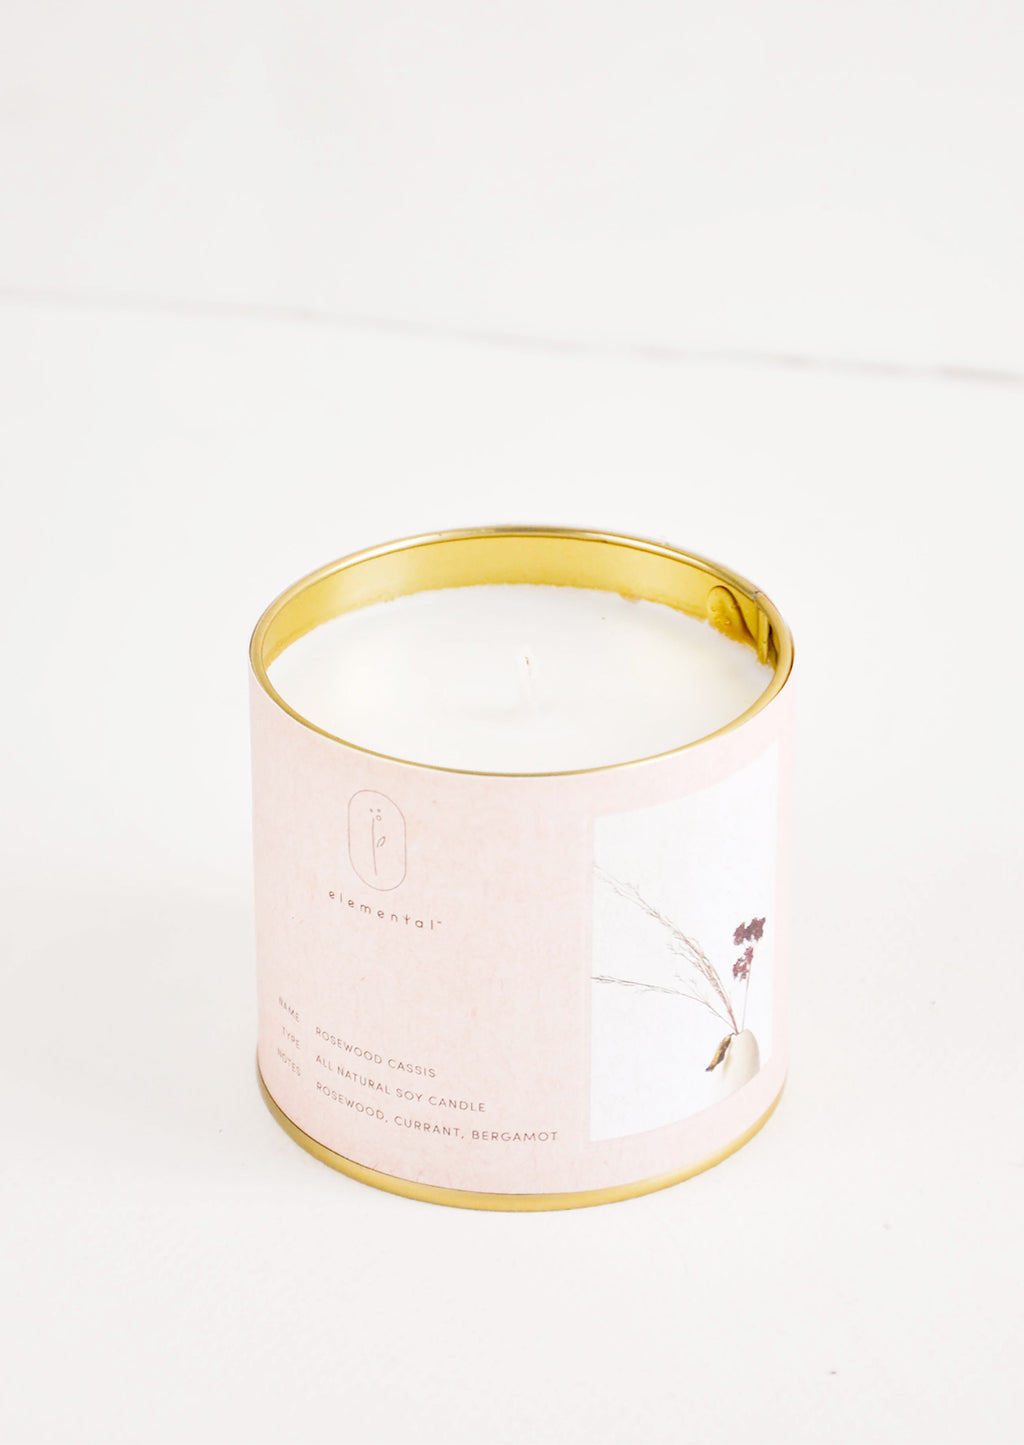 Rosewood Cassis: A candle in a brass tine with a pale pink label featuring a picture of a flower.